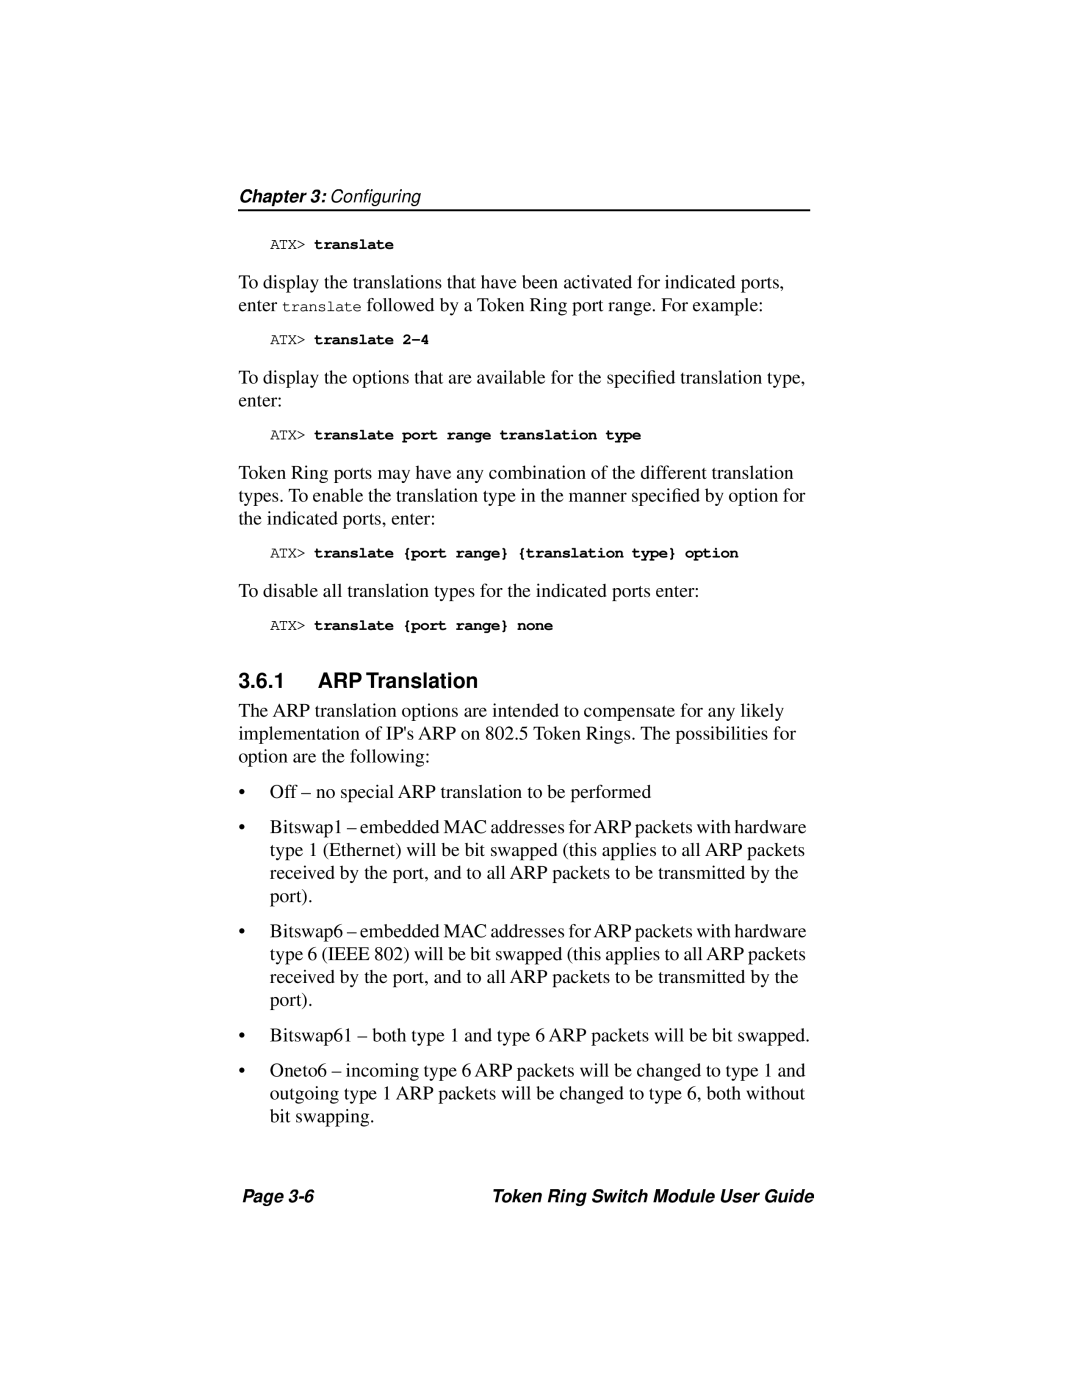 Cabletron Systems 3T02-04 manual ARP Translation 